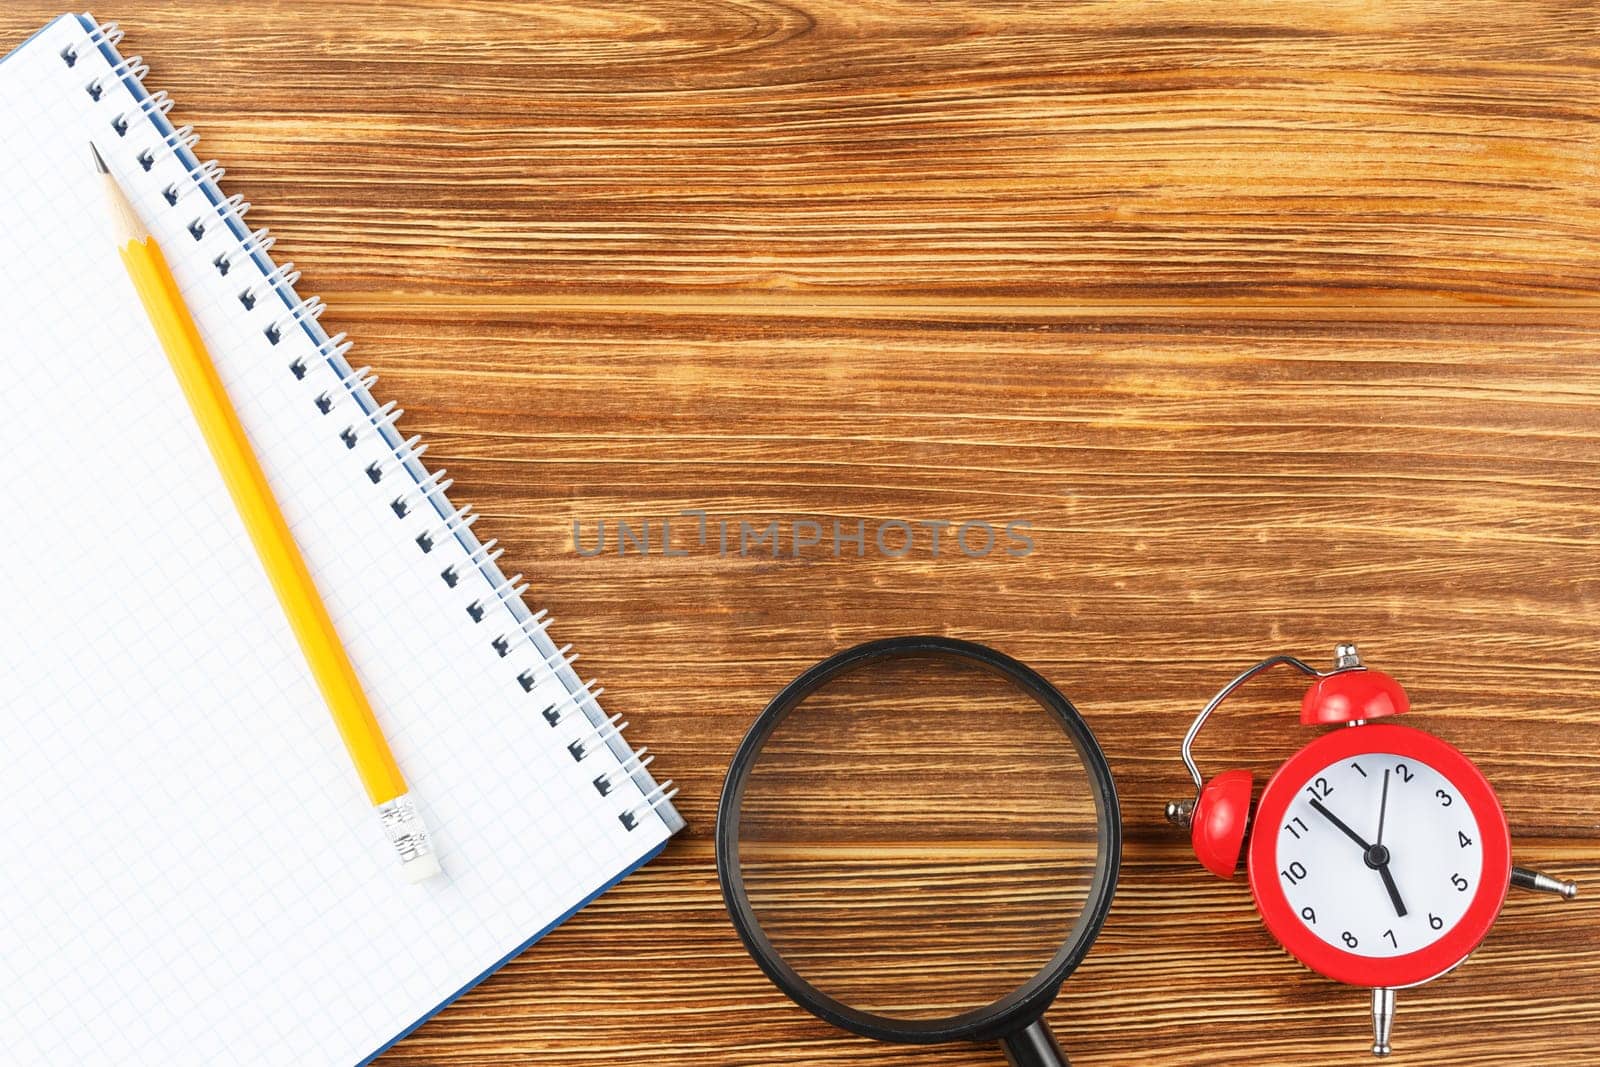 Open spiral notebook with pencil and magnifying glass on wooden background. Study desk with alarm clock. Flat lay. Back to school concept. Top view.